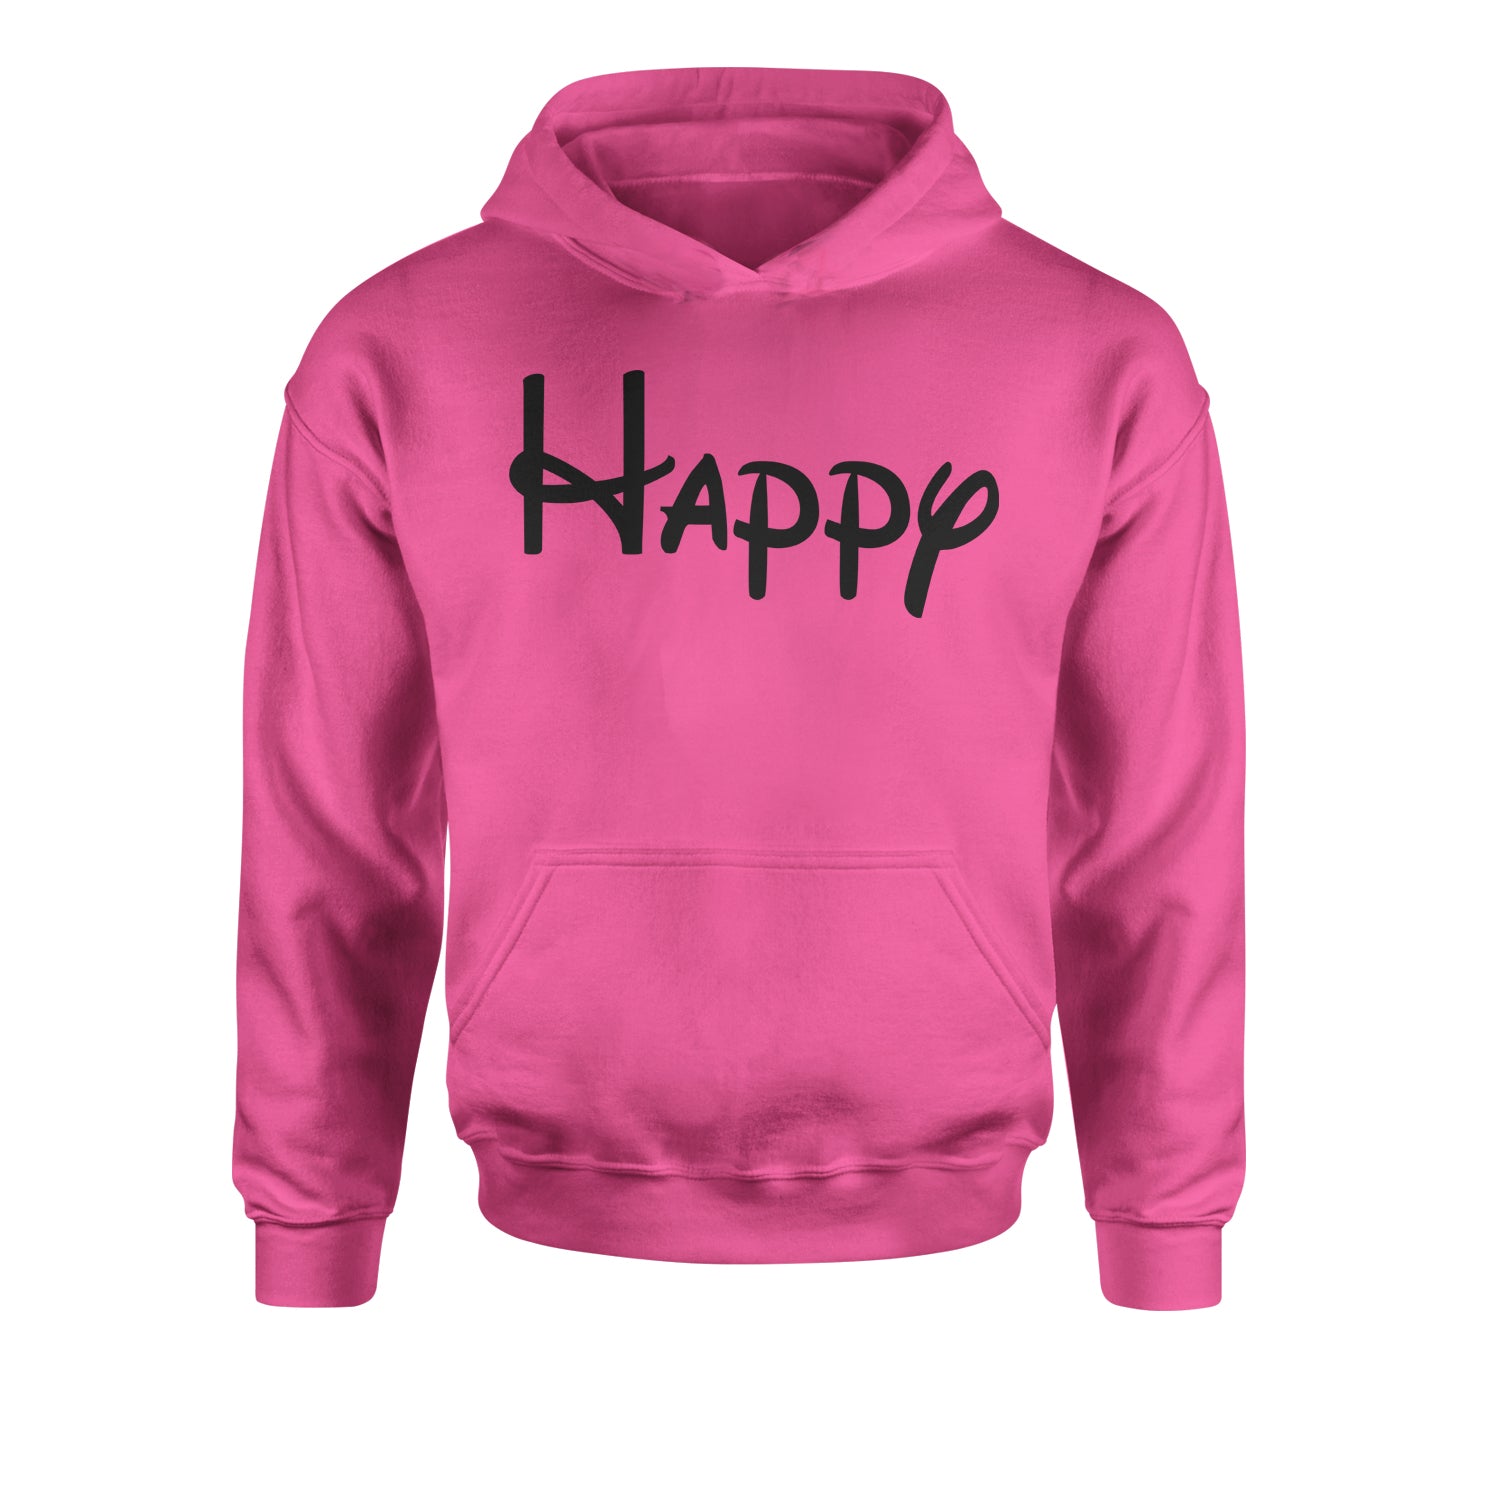 Happy - 7 Dwarfs Costume Youth-Sized Hoodie and, costume, dwarfs, group, halloween, matching, seven, snow, the, white by Expression Tees